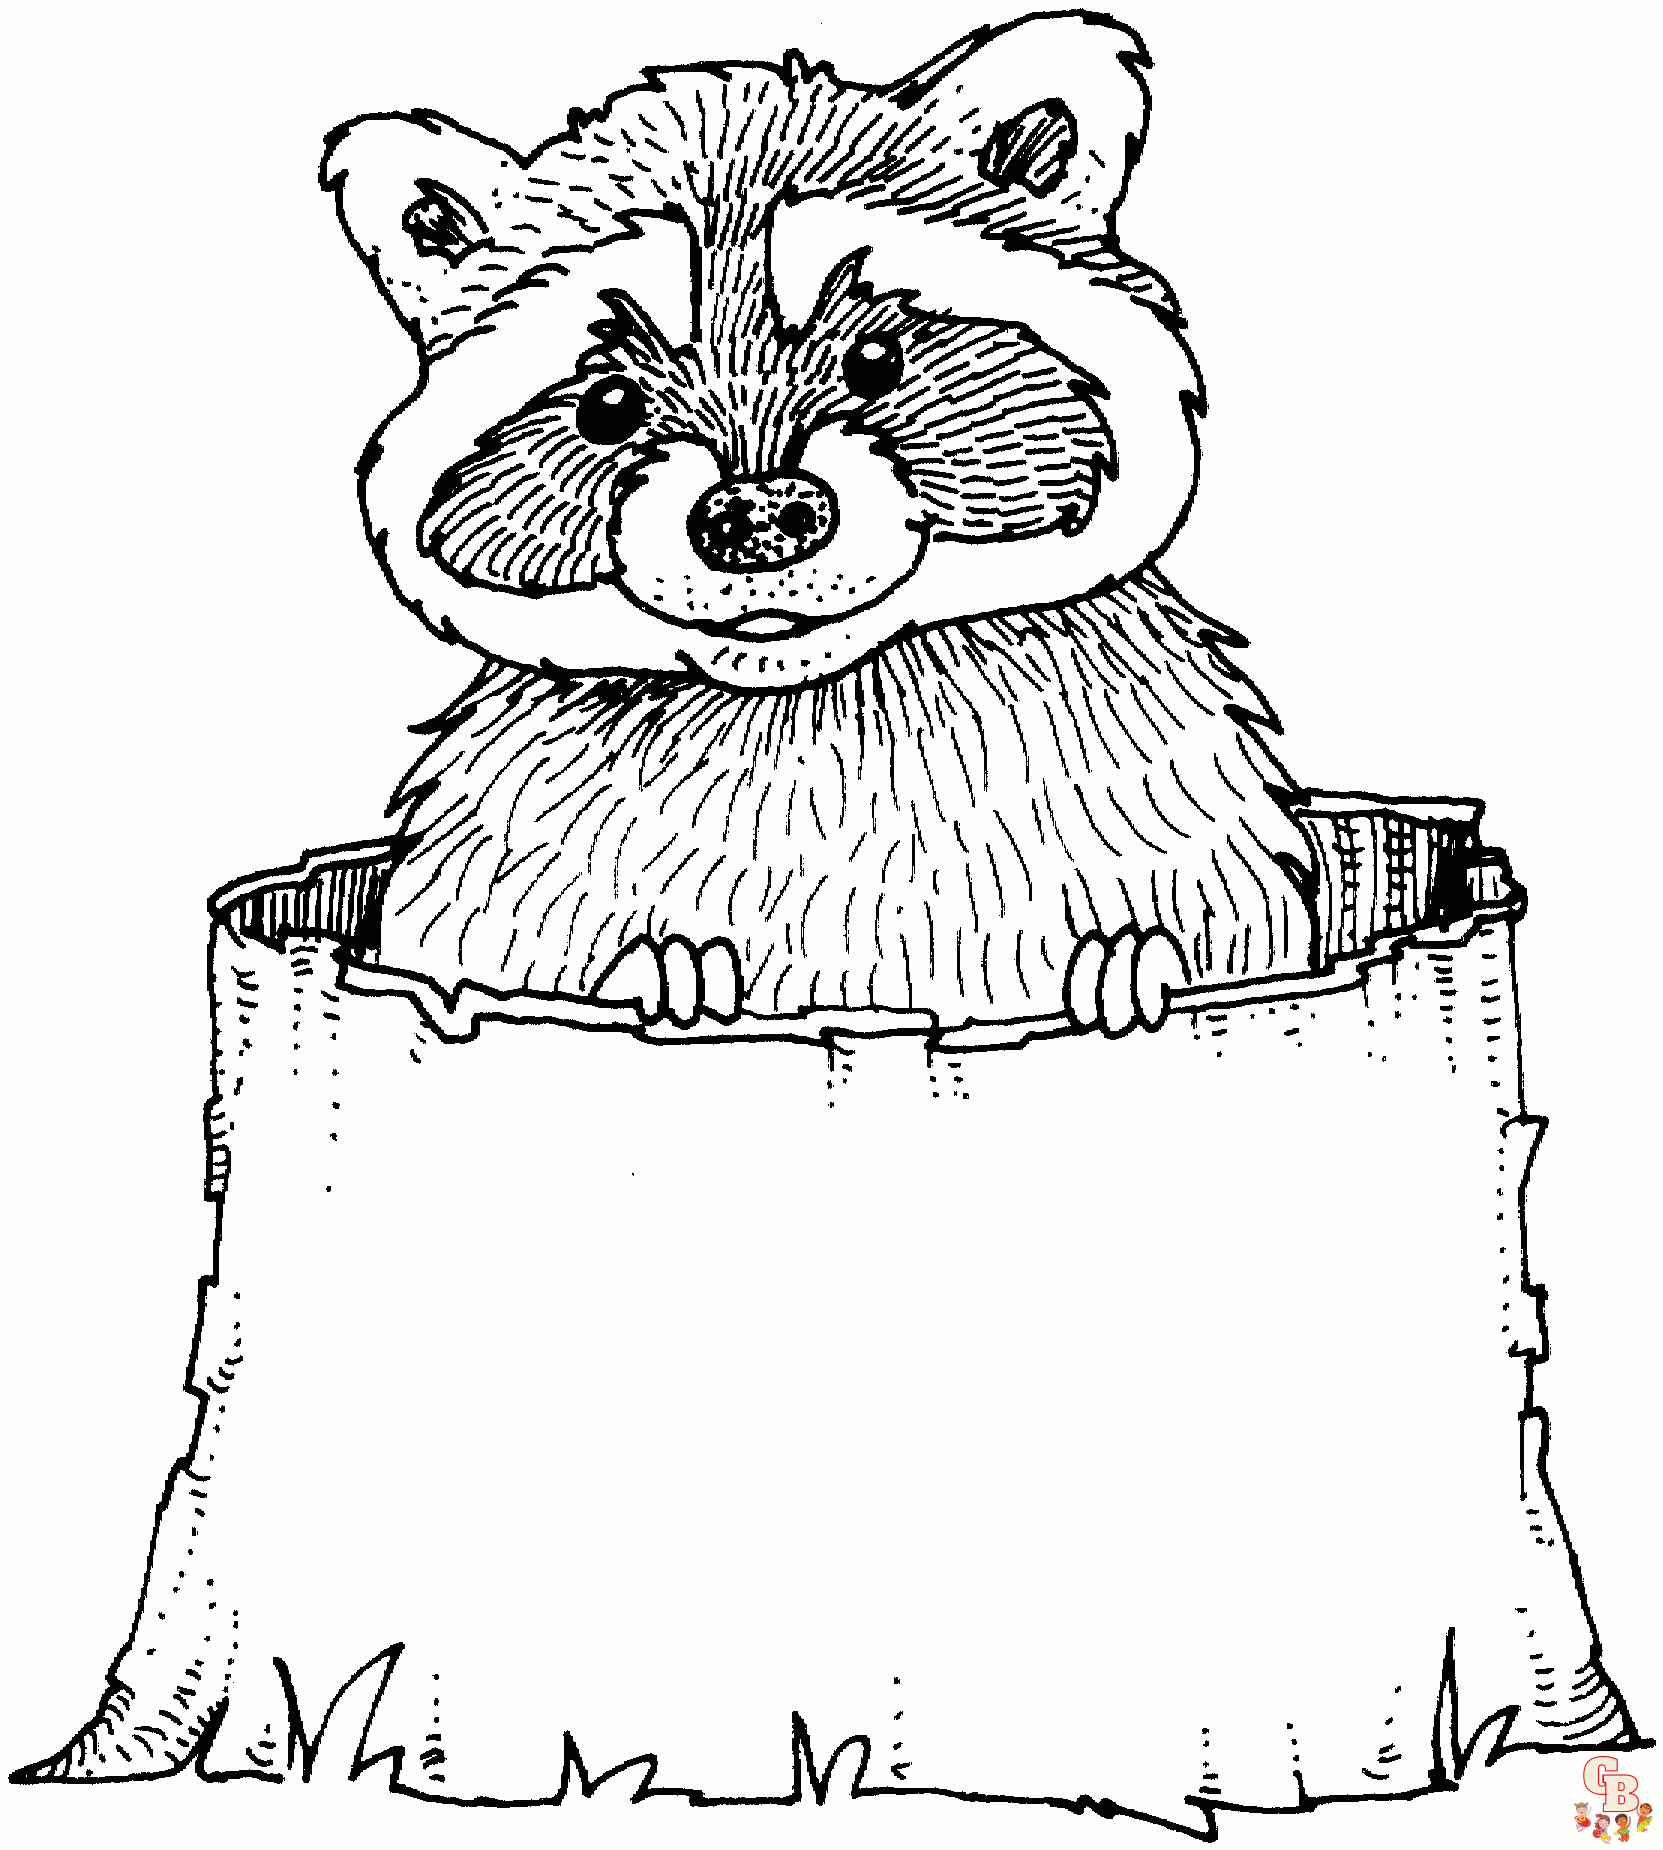 Enjoy free and printable raccoon coloring pages on